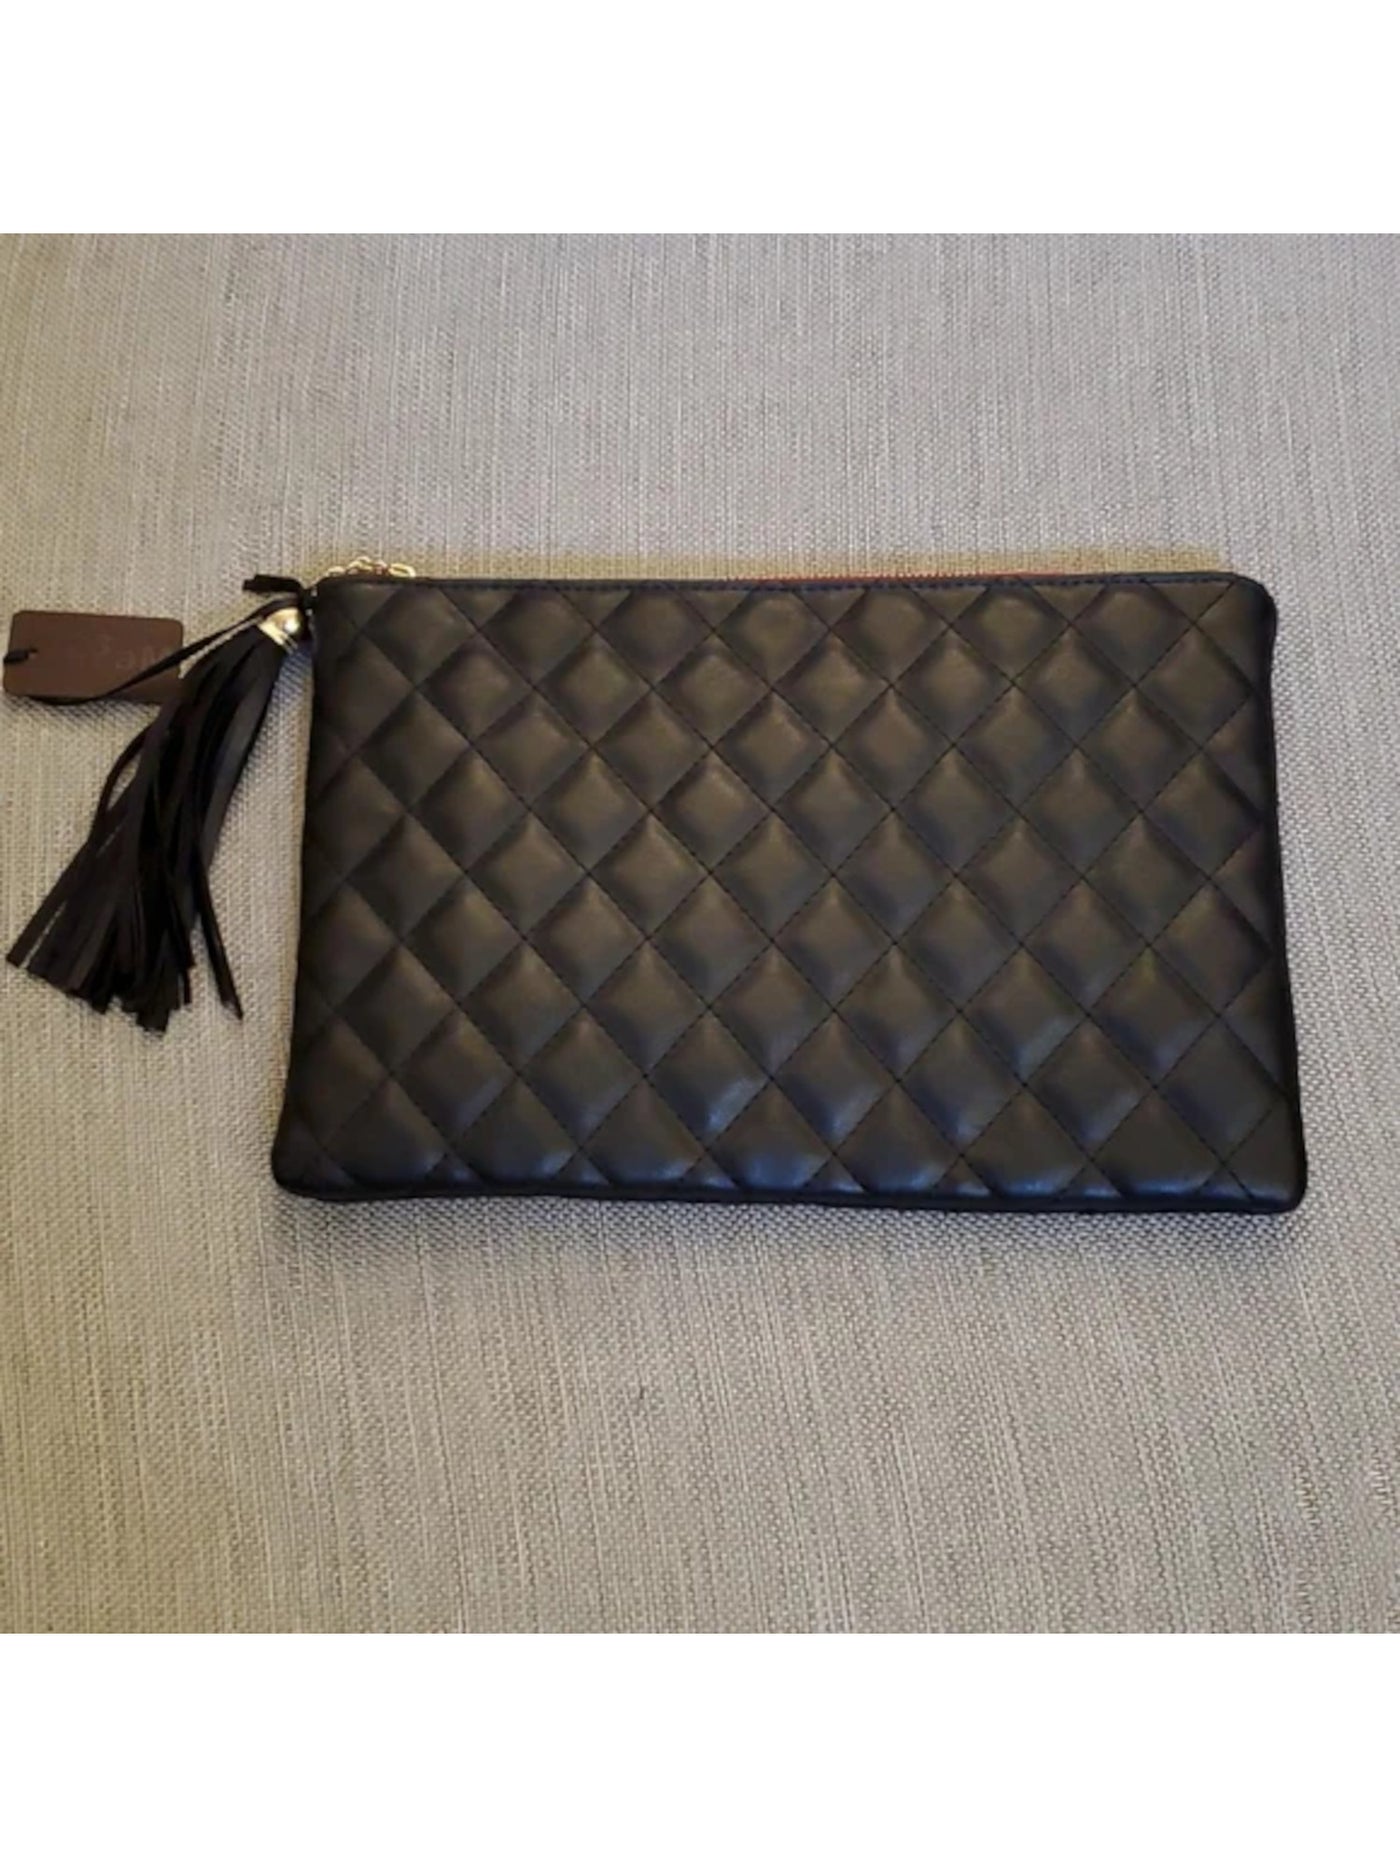 HELLO 3AM Women's Black Quilted Solid Faux Leather Tassled Strapless Side Pack